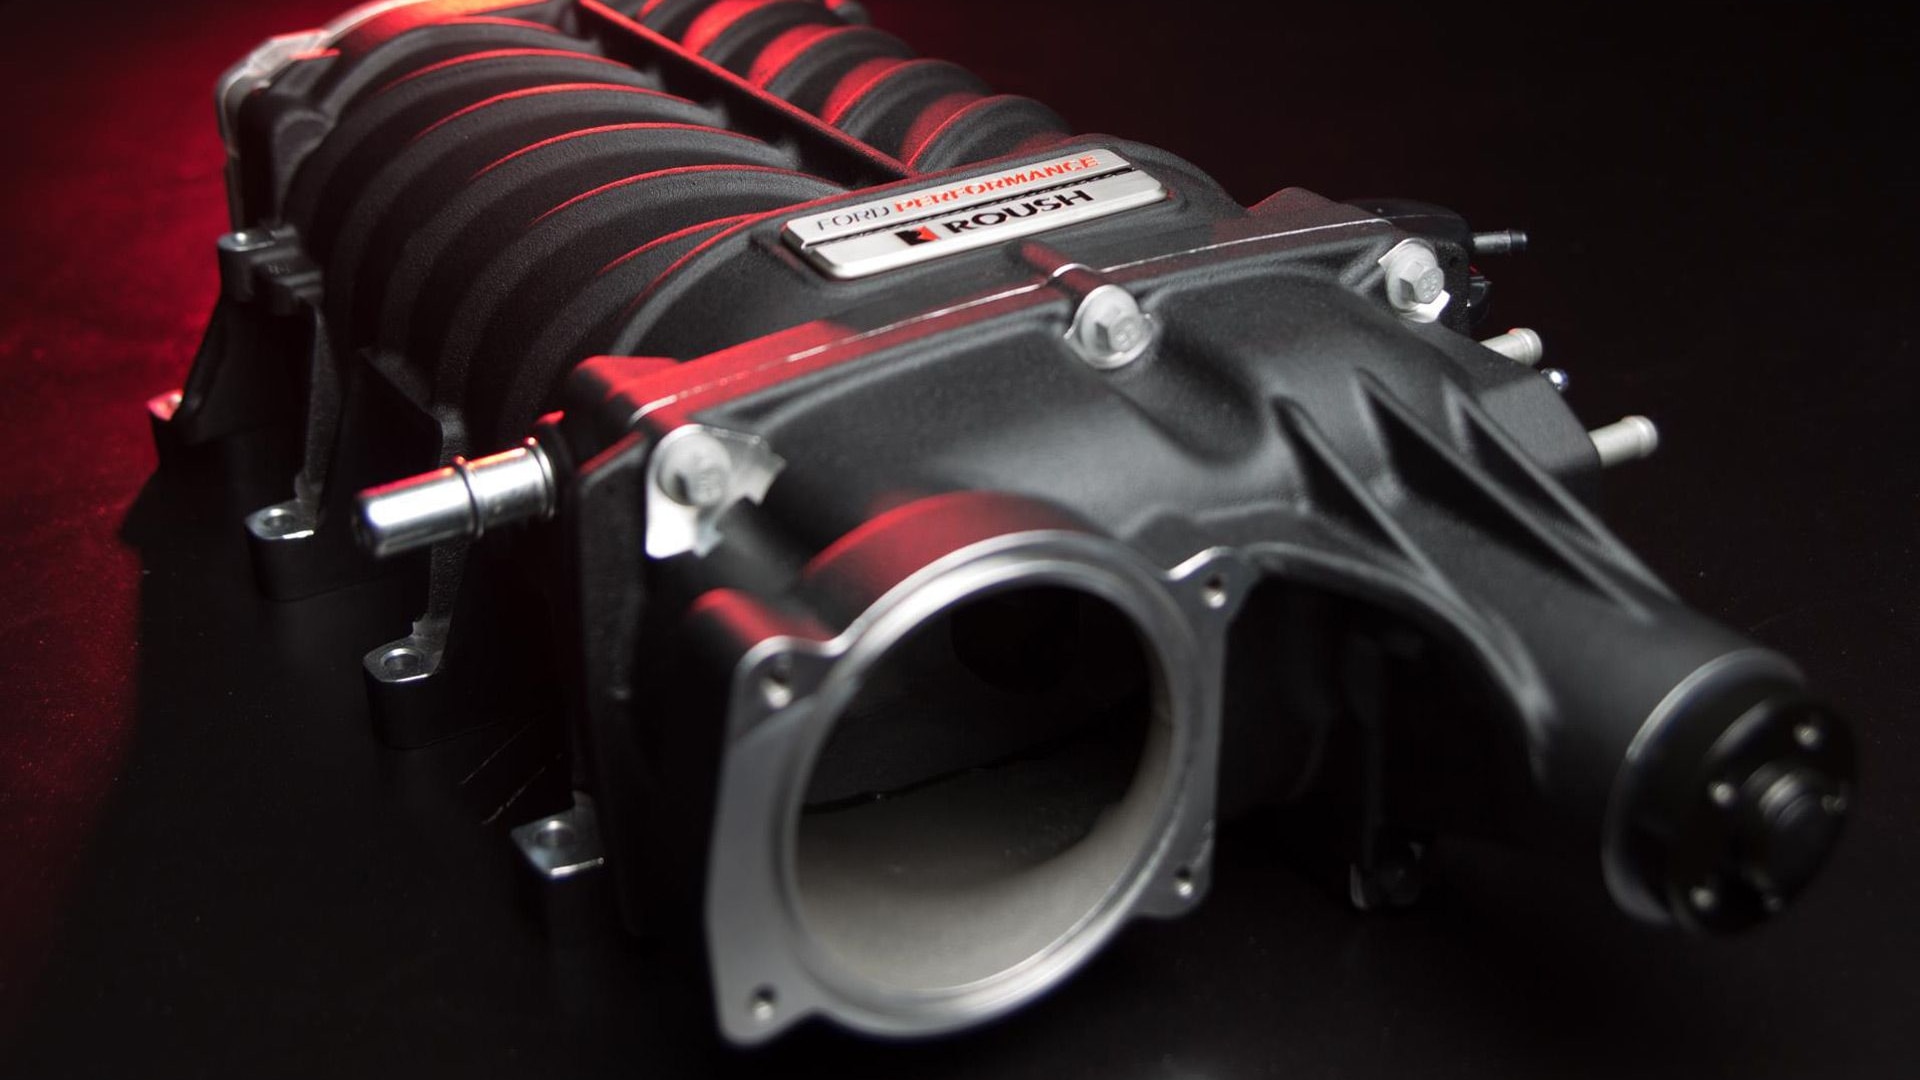 Supercharger developed by Ford Performance and Roush for “Coyote” 5.0-liter V-8